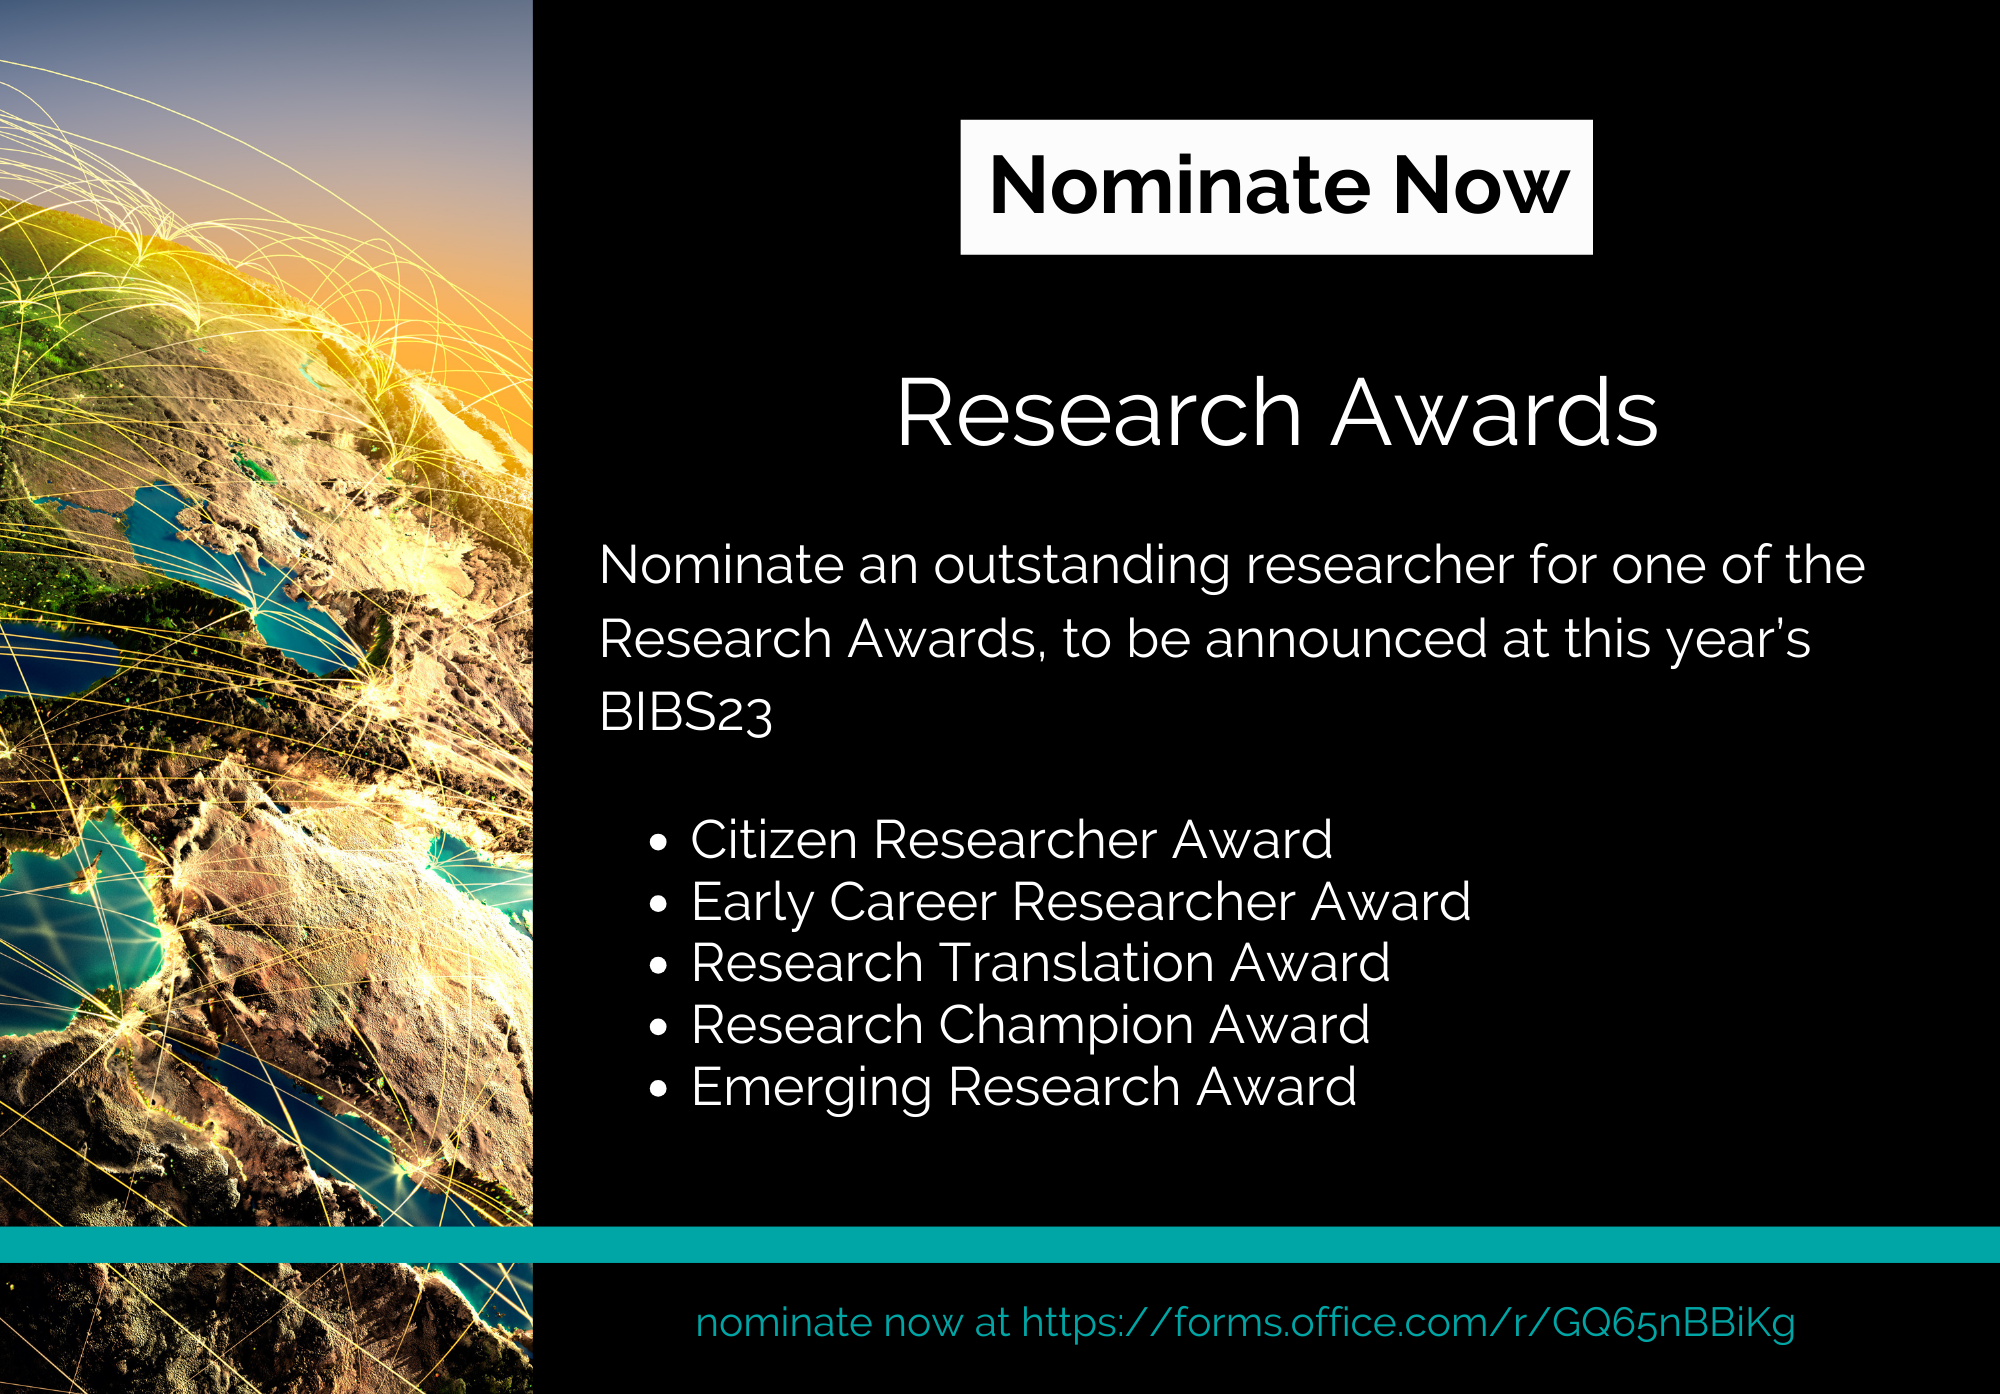 A black background takes up the right ¾ of a tile. On this section is a large white rectangle at the top with the words “nominate now” in black lettering. Underneath is the title Research Awards and then other words describing the research awards in white lettering. Running vertically across the bottom of the tile is a turquoise line. Taking up the right 1/4 of the tile, covering the black background is the Hopkins hero image of the earth with golden arches connecting different land masses.